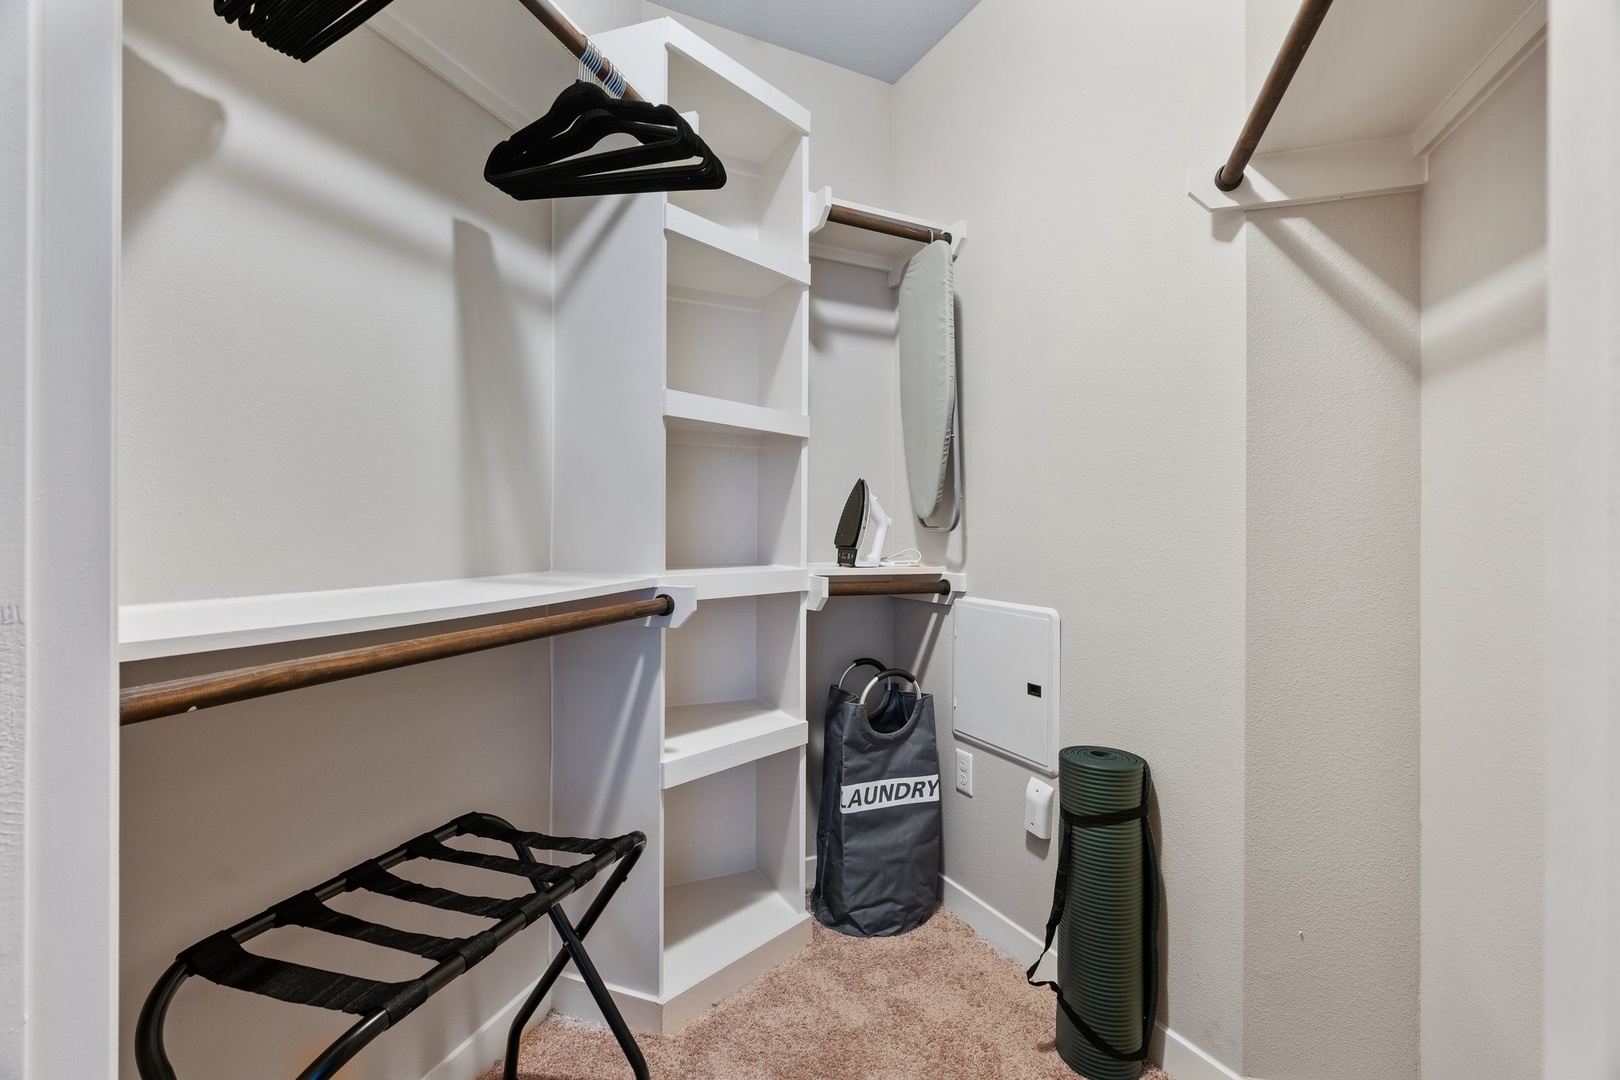 Relax and stay organized with the spacious walk-in closet.